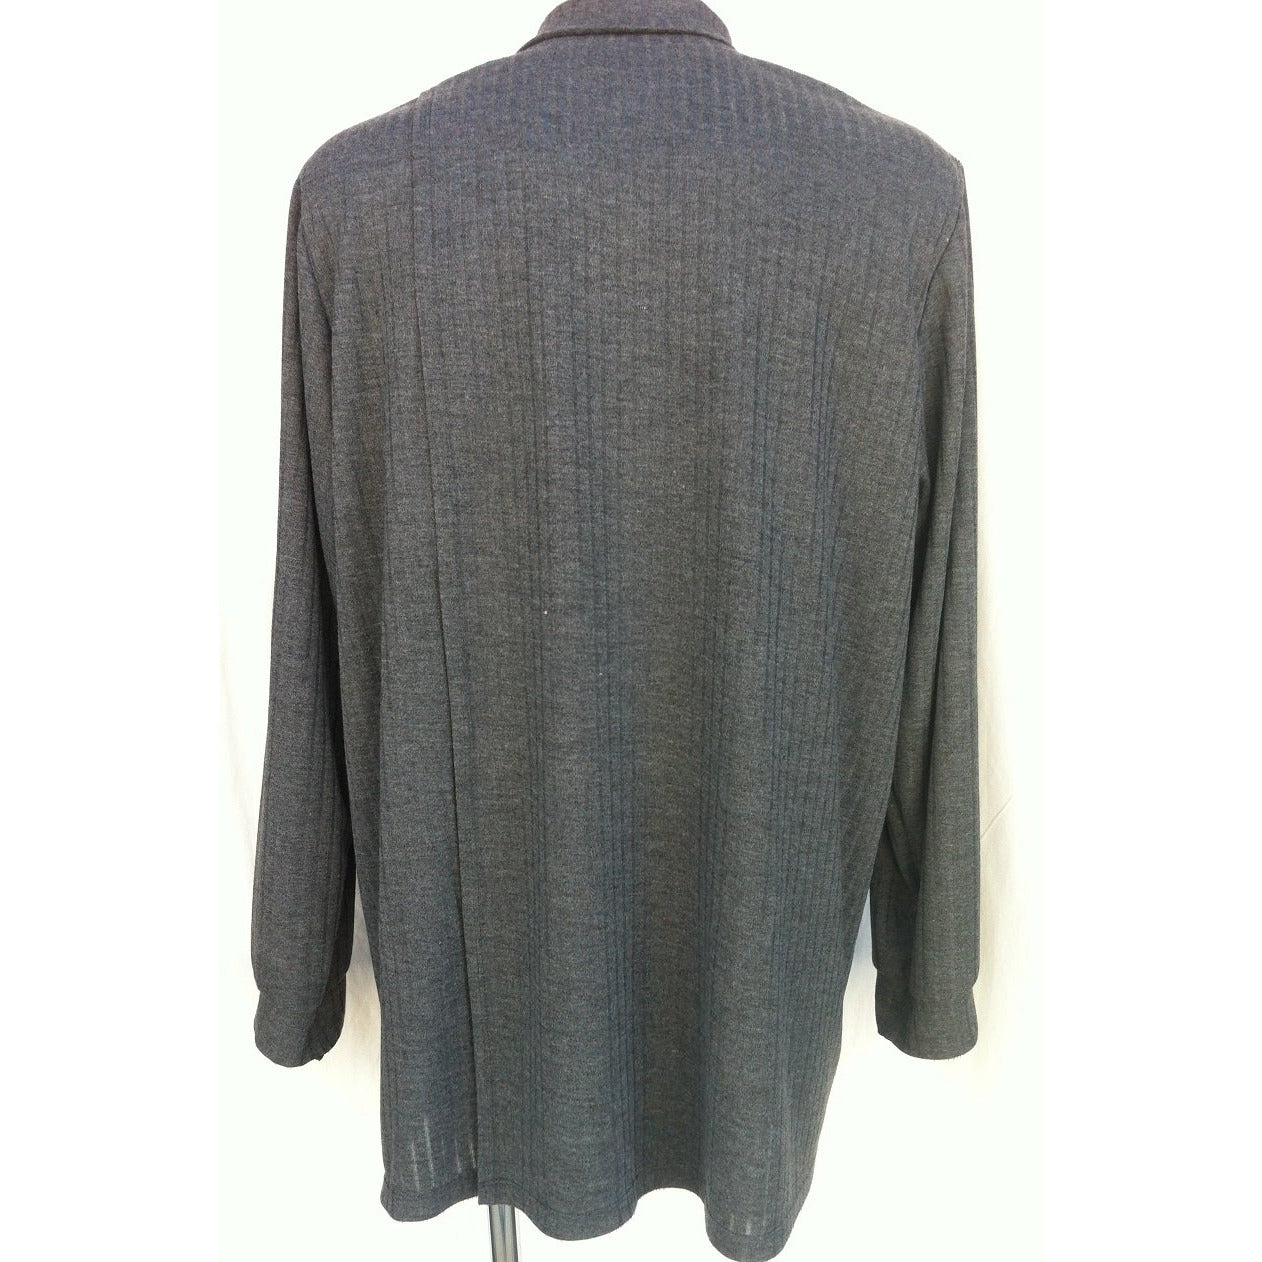 Men's Roll Collar Long Sleeve Top - CHARCOAL - Adaptive Fitz Clothing